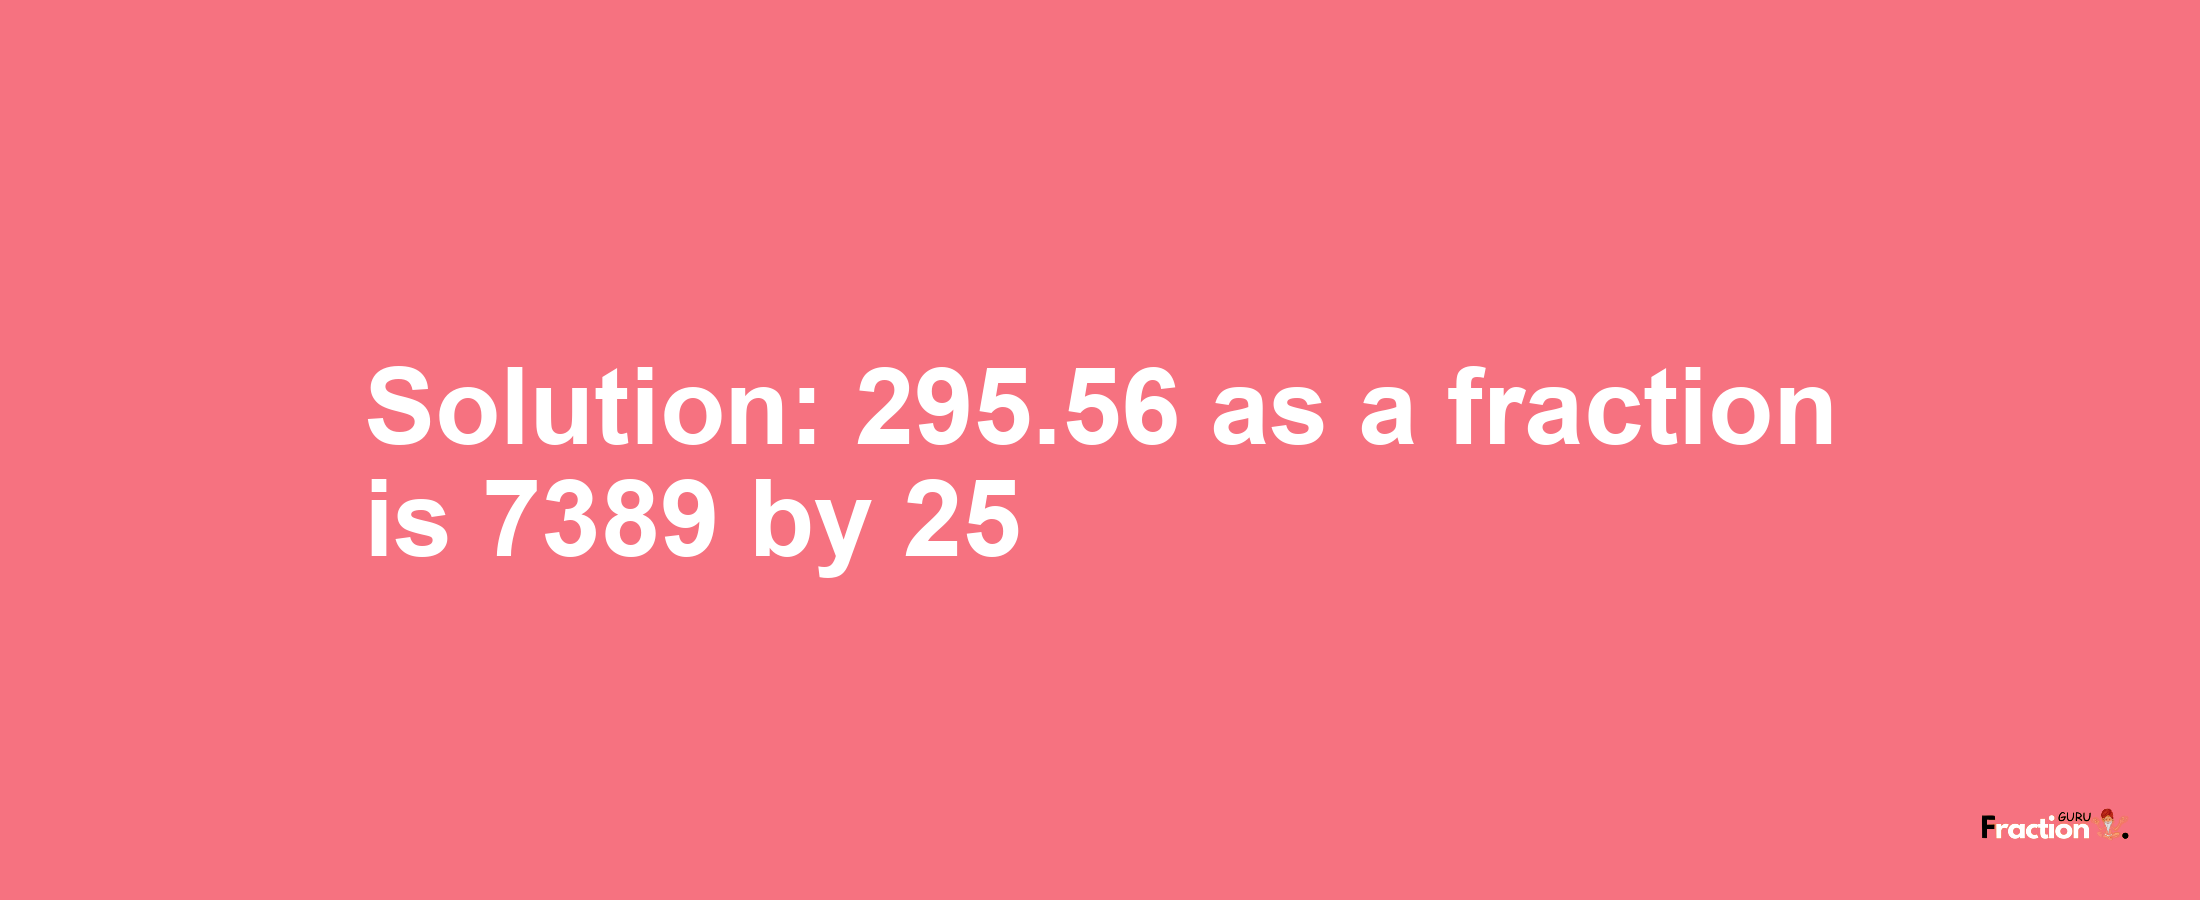 Solution:295.56 as a fraction is 7389/25